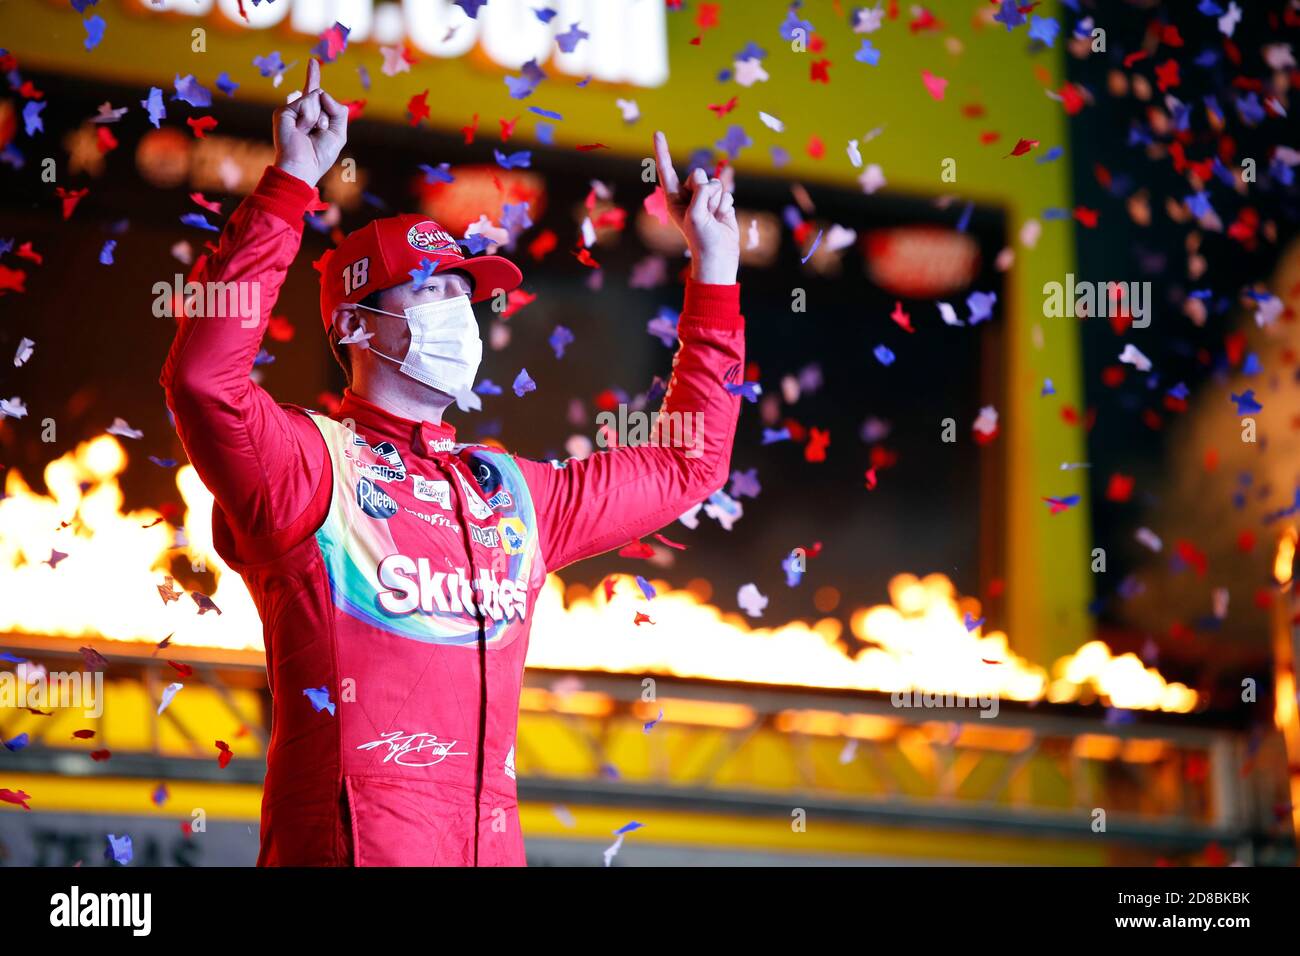 Fort Worth, Texas, USA. 28th Oct, 2020. Kyle Busch (18) wins the Autotrader EchoPark Automotive 500 at Texas Motor Speedway in Fort Worth, Texas